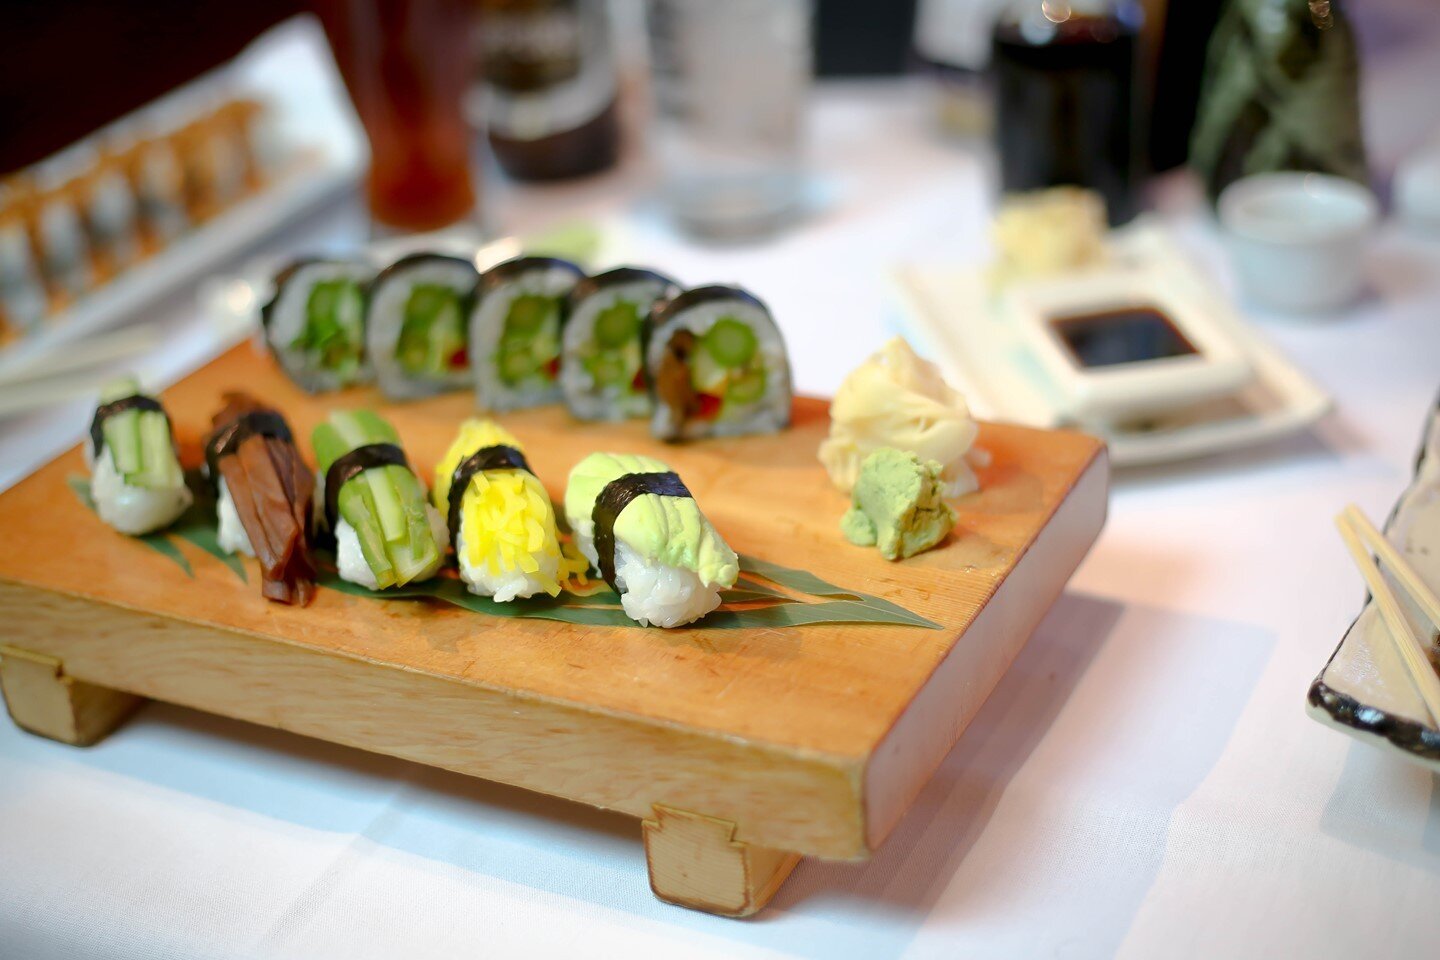 If you could only get one roll of sushi, which roll would it be? Browse our mouthwatering menu for inspiration, link in bio 
-
-
-
-
-
-
-
-
-
 Oishistl.com | Chesterfield: (636) 530-1198 | Creve Coeur: (314) 567-4478 | #oishistl #chesterfield #creve